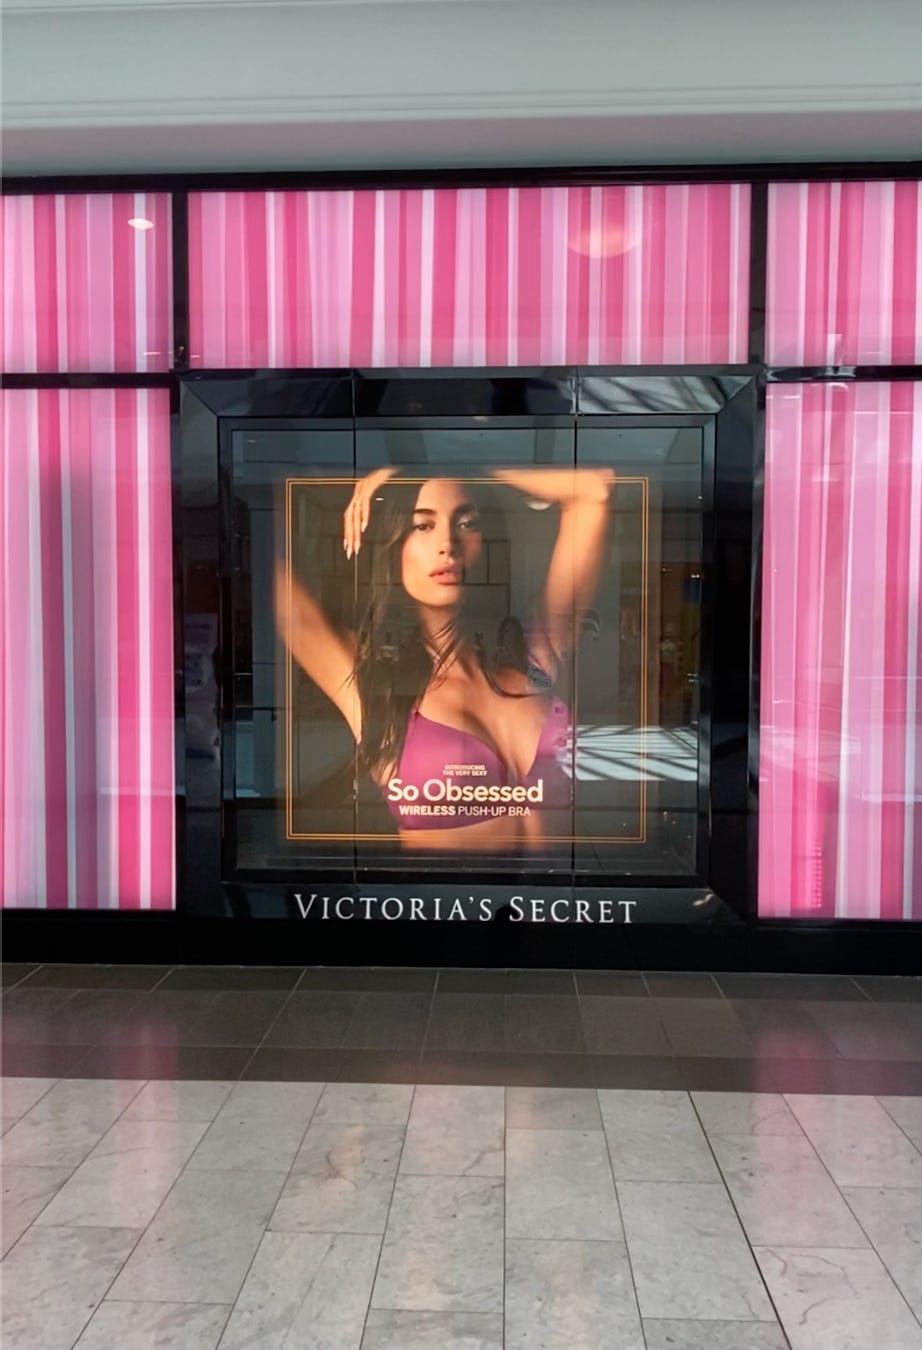 Victoria's Secret has Nothin' on My Breasts!